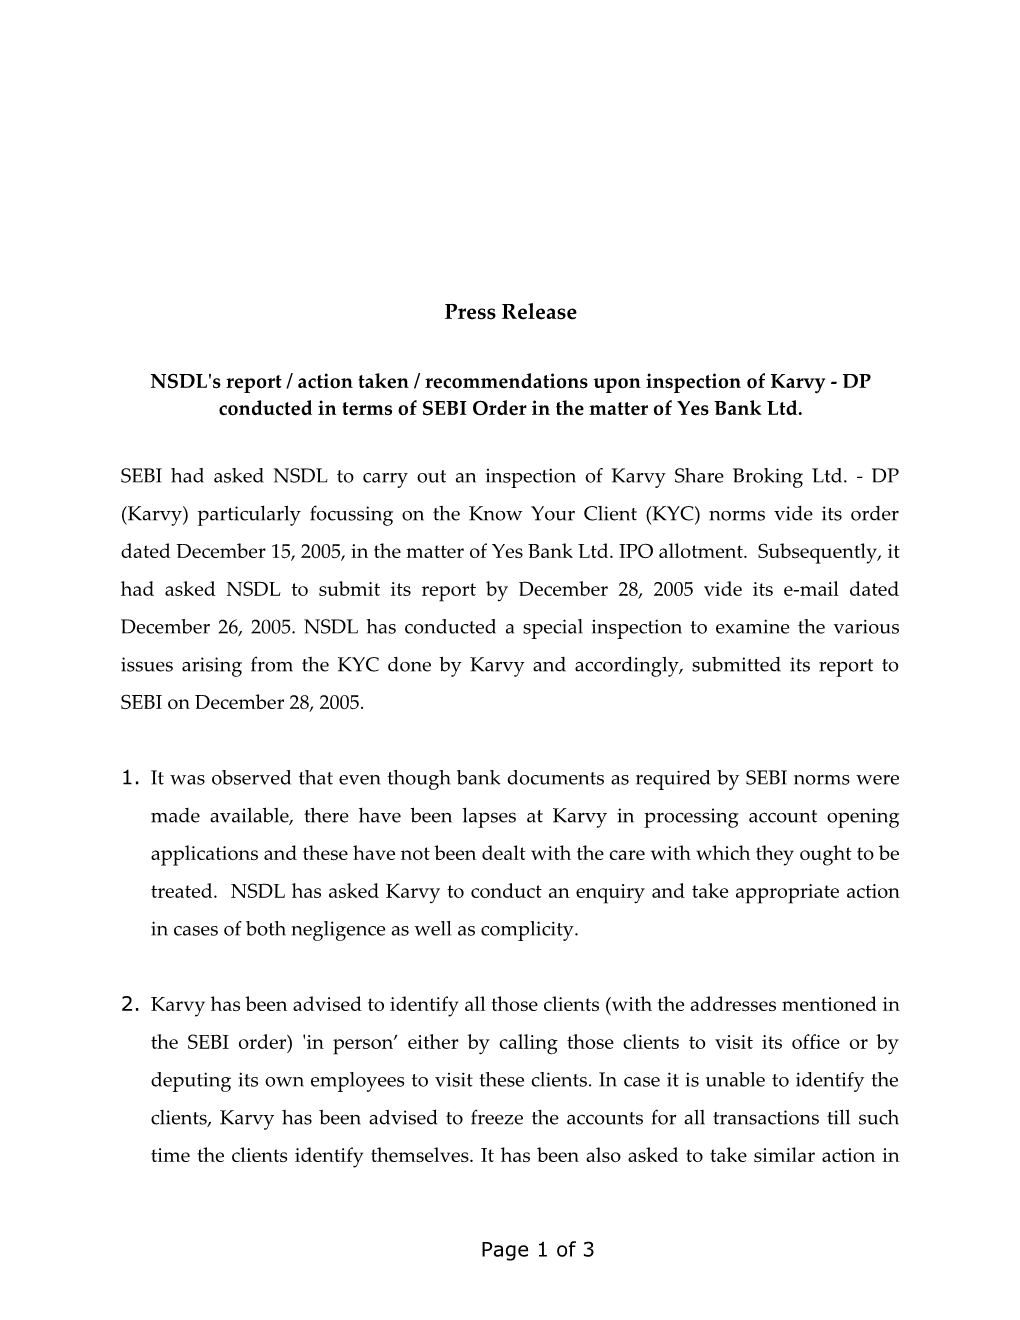 NSDL's Report / Action Taken / Recommendations Upon Inspection of Karvy - DP Conducted